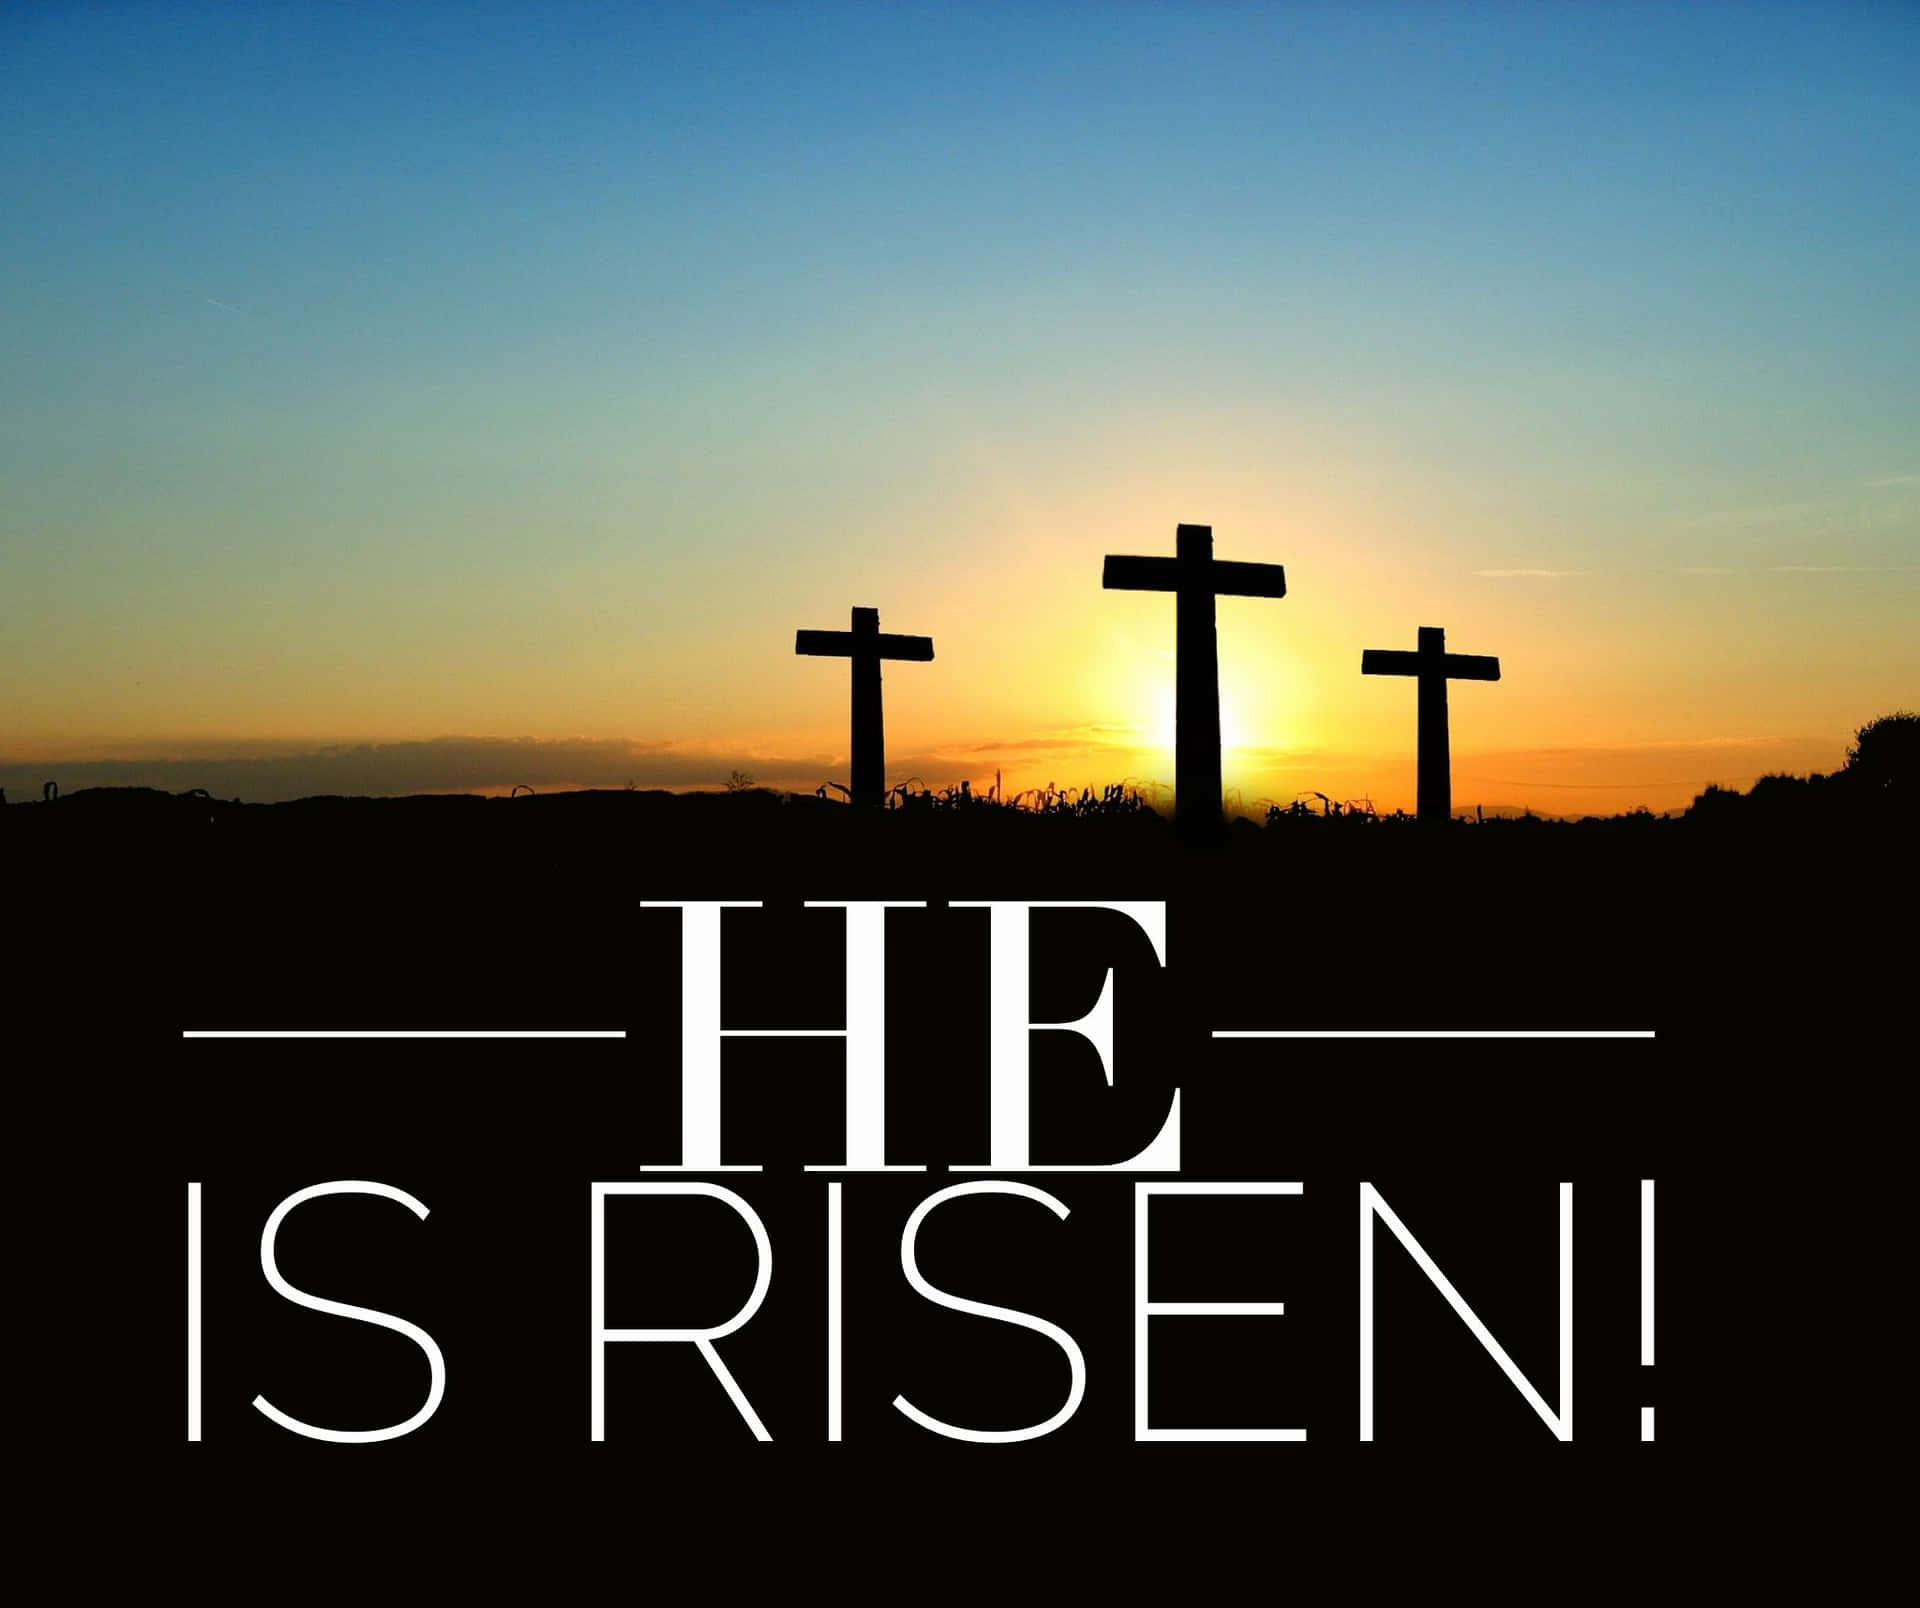 Download He Is Risen With Three Crosses In The Background Wallpaper